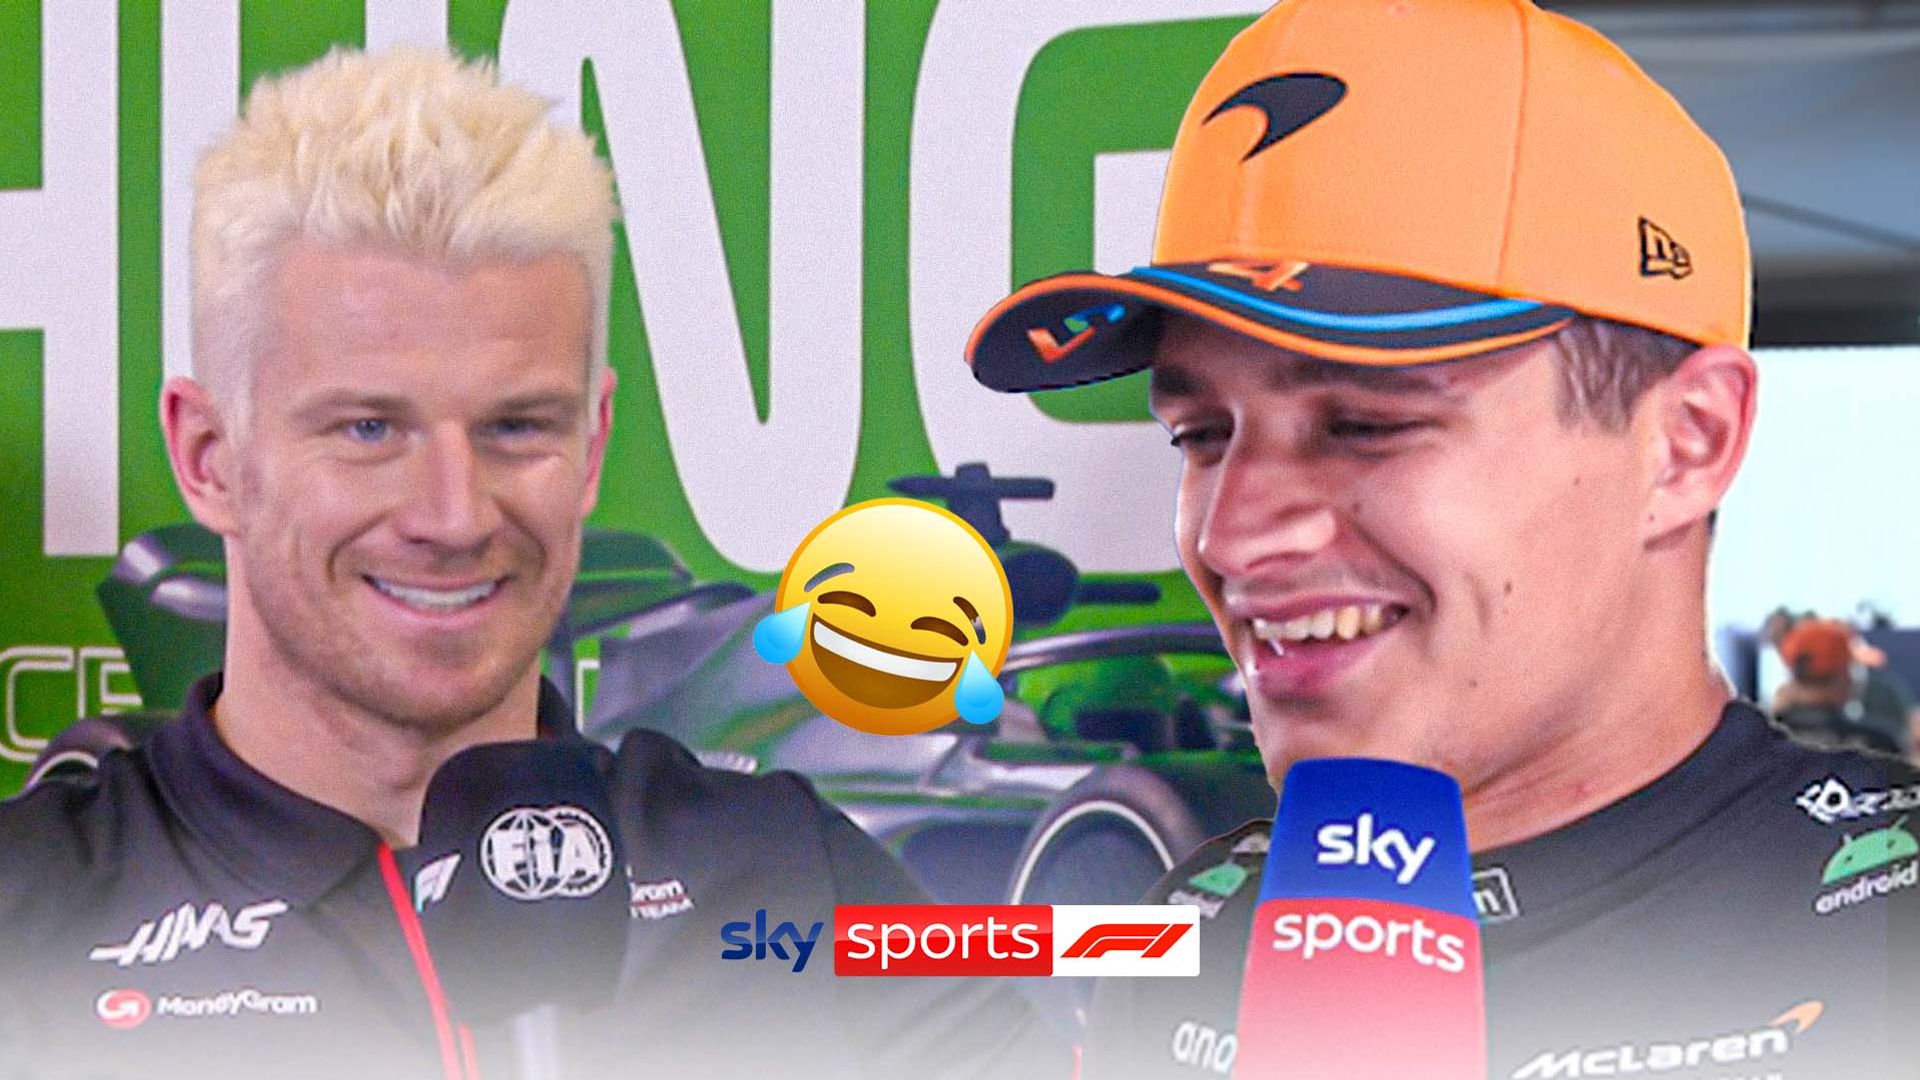 Haircuts, ice-cream and champagne shenanigans! | Hungarian GP Funniest Moments